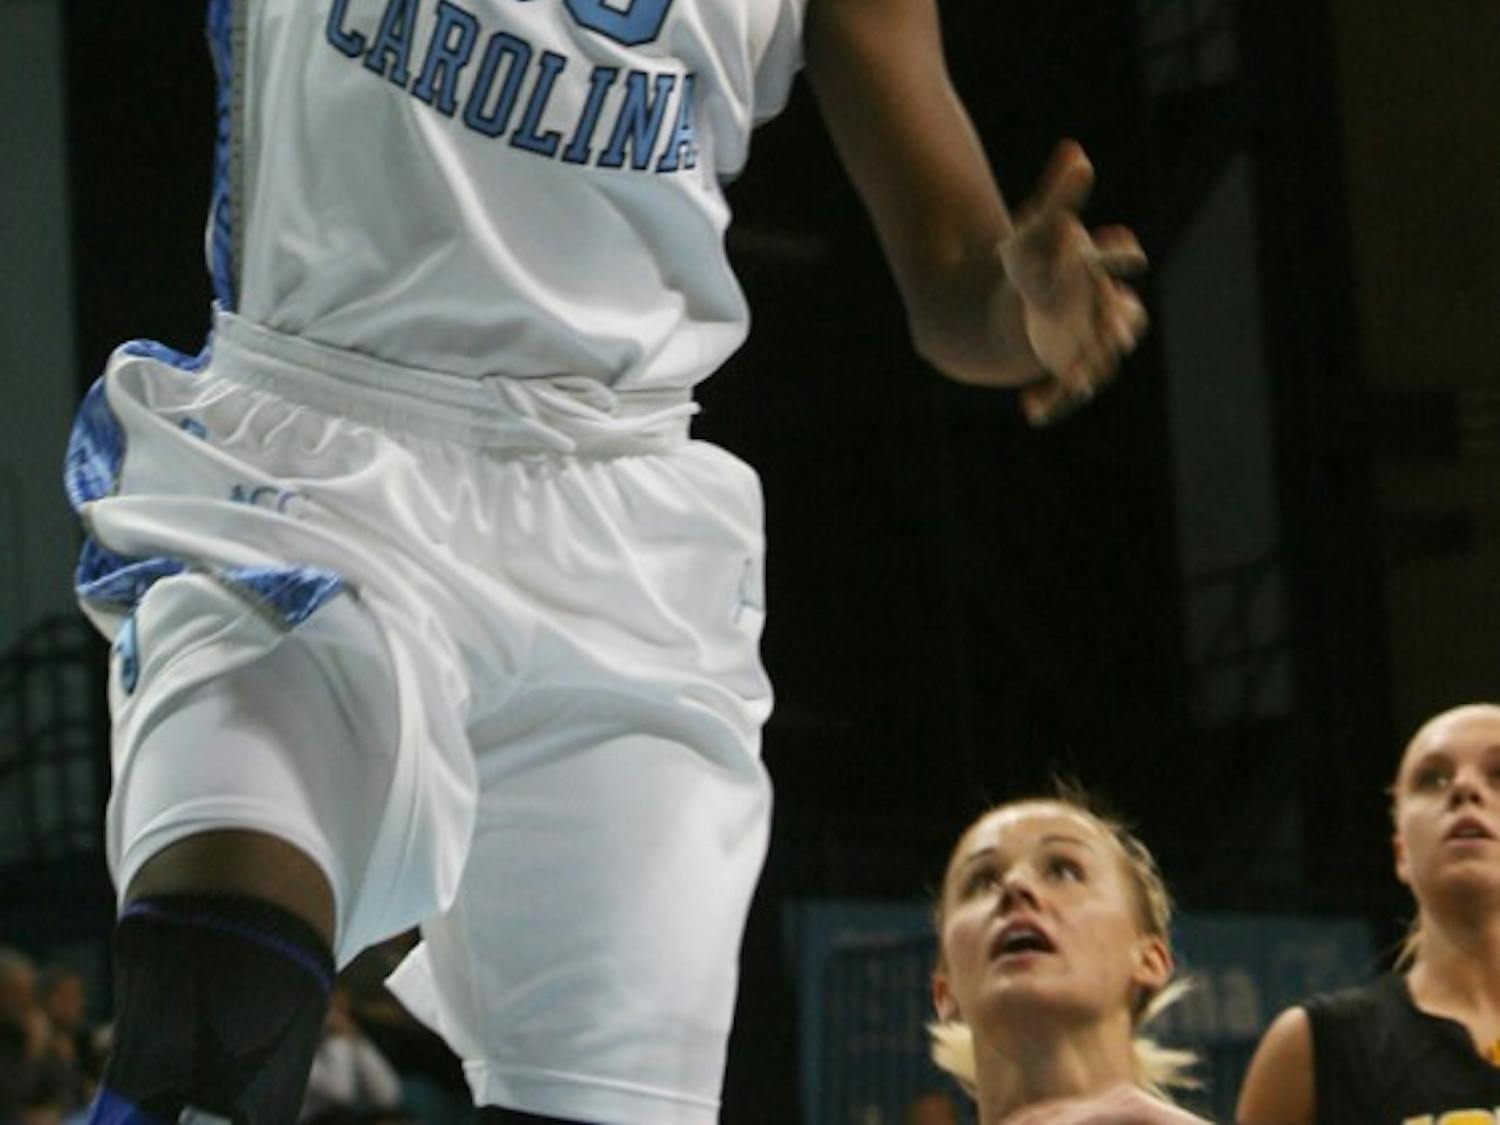 North Carolina forward Laura Broomfield goes up for a layup against Iowa. The 6-foot-1 junior scored 12 points and grabbed 11 rebounds in 20 minutes of action. It was her first double-double this year.